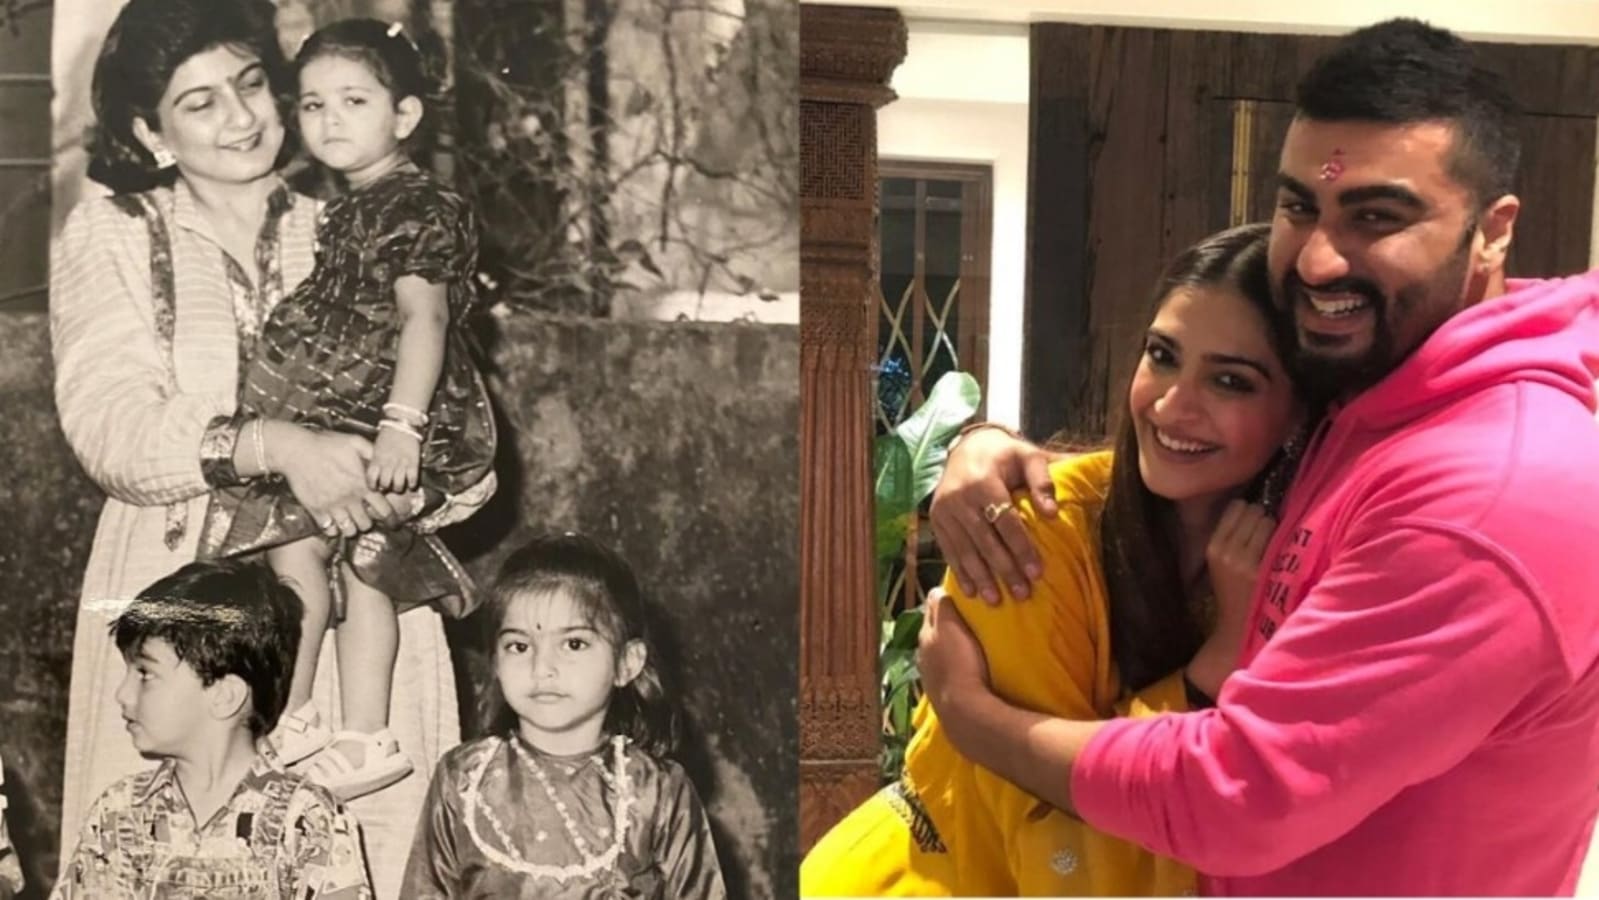 Sonam Kapoor poses for camera while Arjun Kapoor gets distracted in childhood pics, she says: ‘So much fun we’ve had’